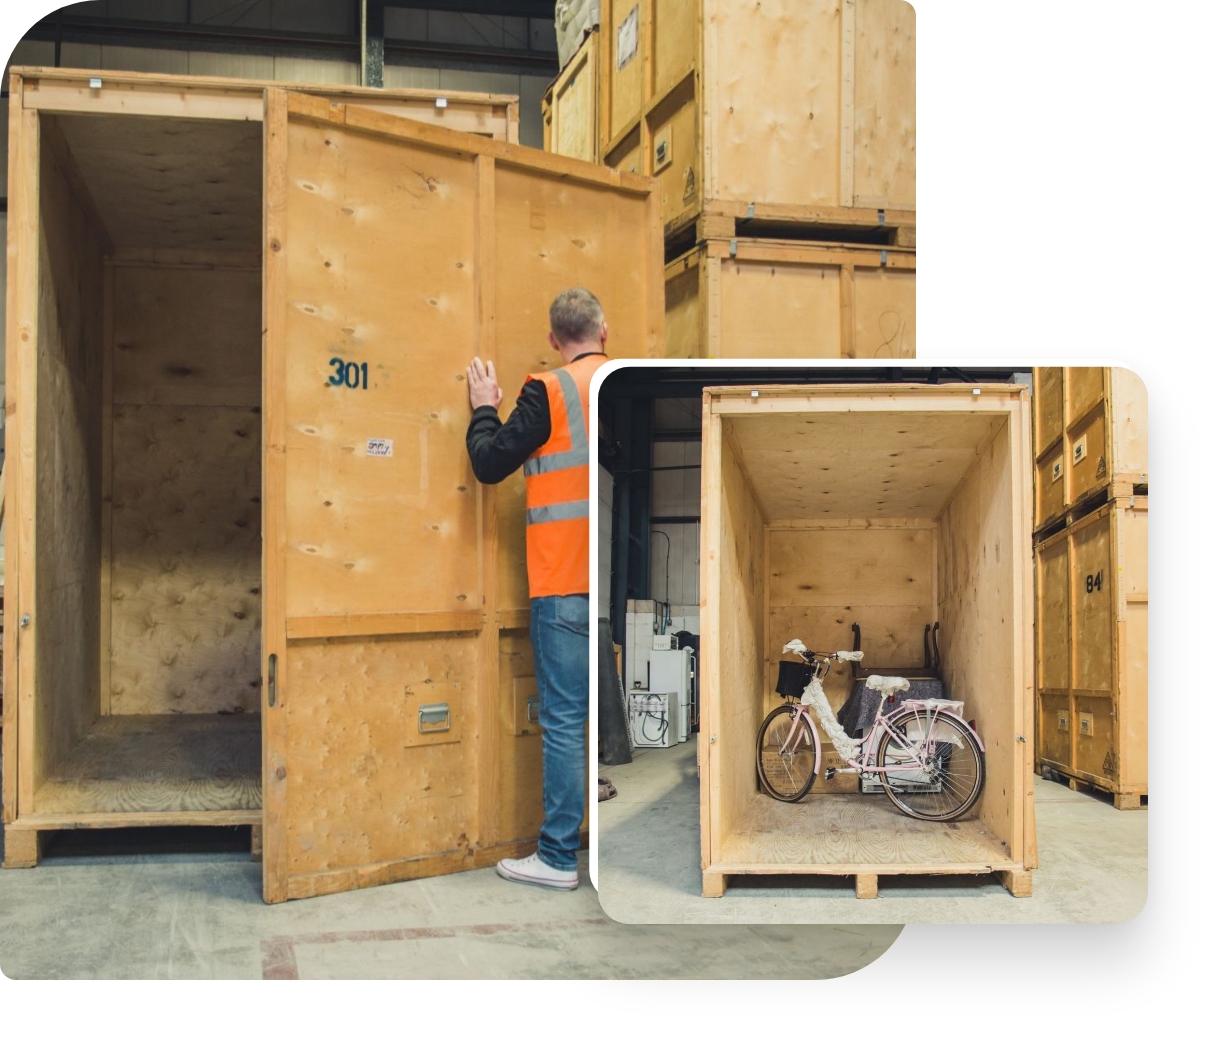 The image shows pictures of a storage facility in London, showcasing the various storage units containing belongings.